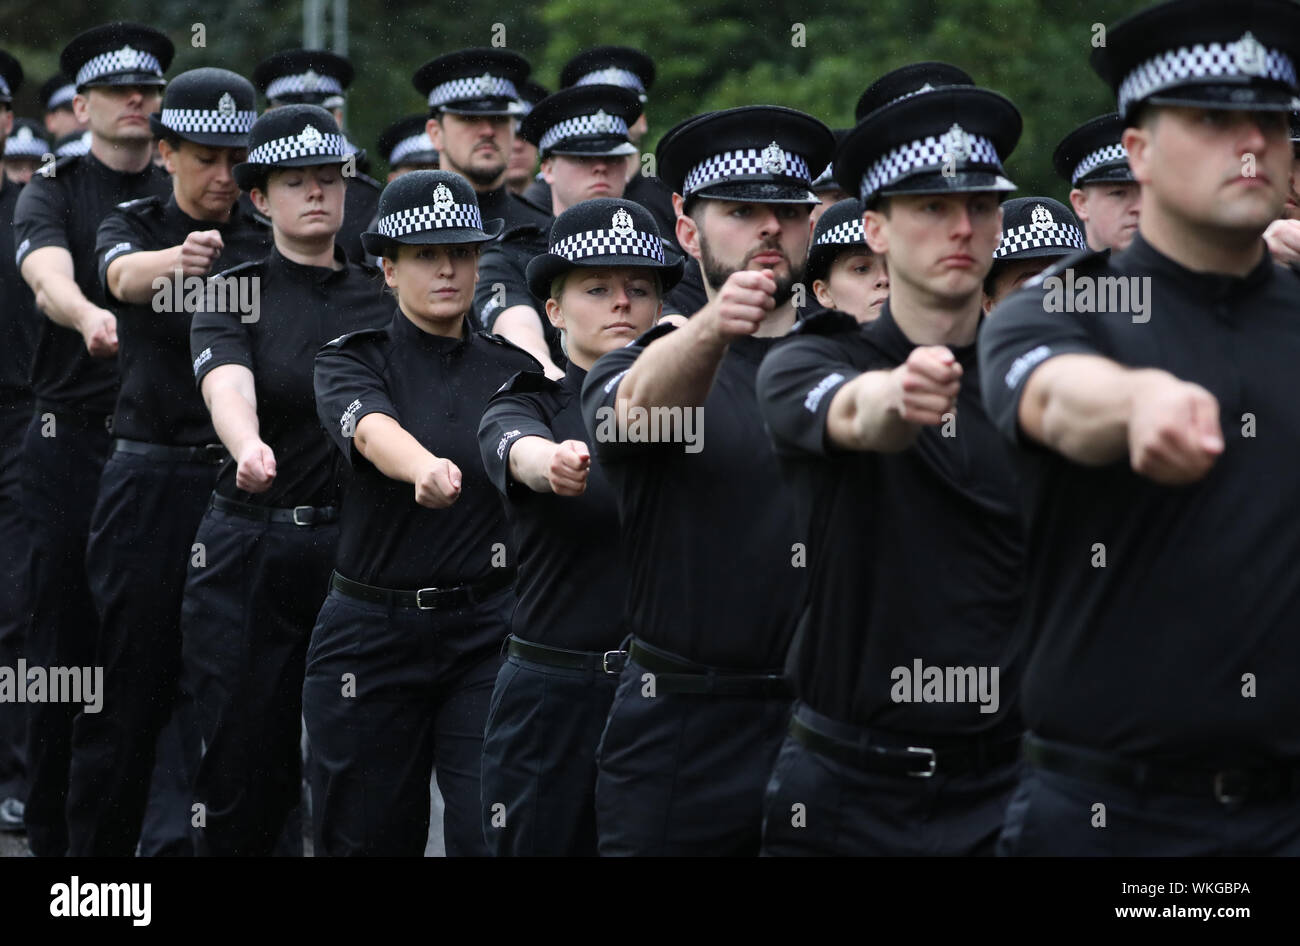 Police Scotland officers on probation, take part in the Scottish Police Memorial Service at Police Scotland headquarters at Tulliallan. PA Photo. Picture date: Wednesday September 4, 2019. The annual event, is attended by the families of officers who have died on duty in Scotland, as well as senior officers and politicians. This year the constitution of the Scottish Police Memorial Trust has been amended to enable the names of all those who died on duty whilst serving with a policing agency in Scotland to also be included on the memorial at Tulliallan. See PA story SCOTLAND Memorial. Photo Stock Photo